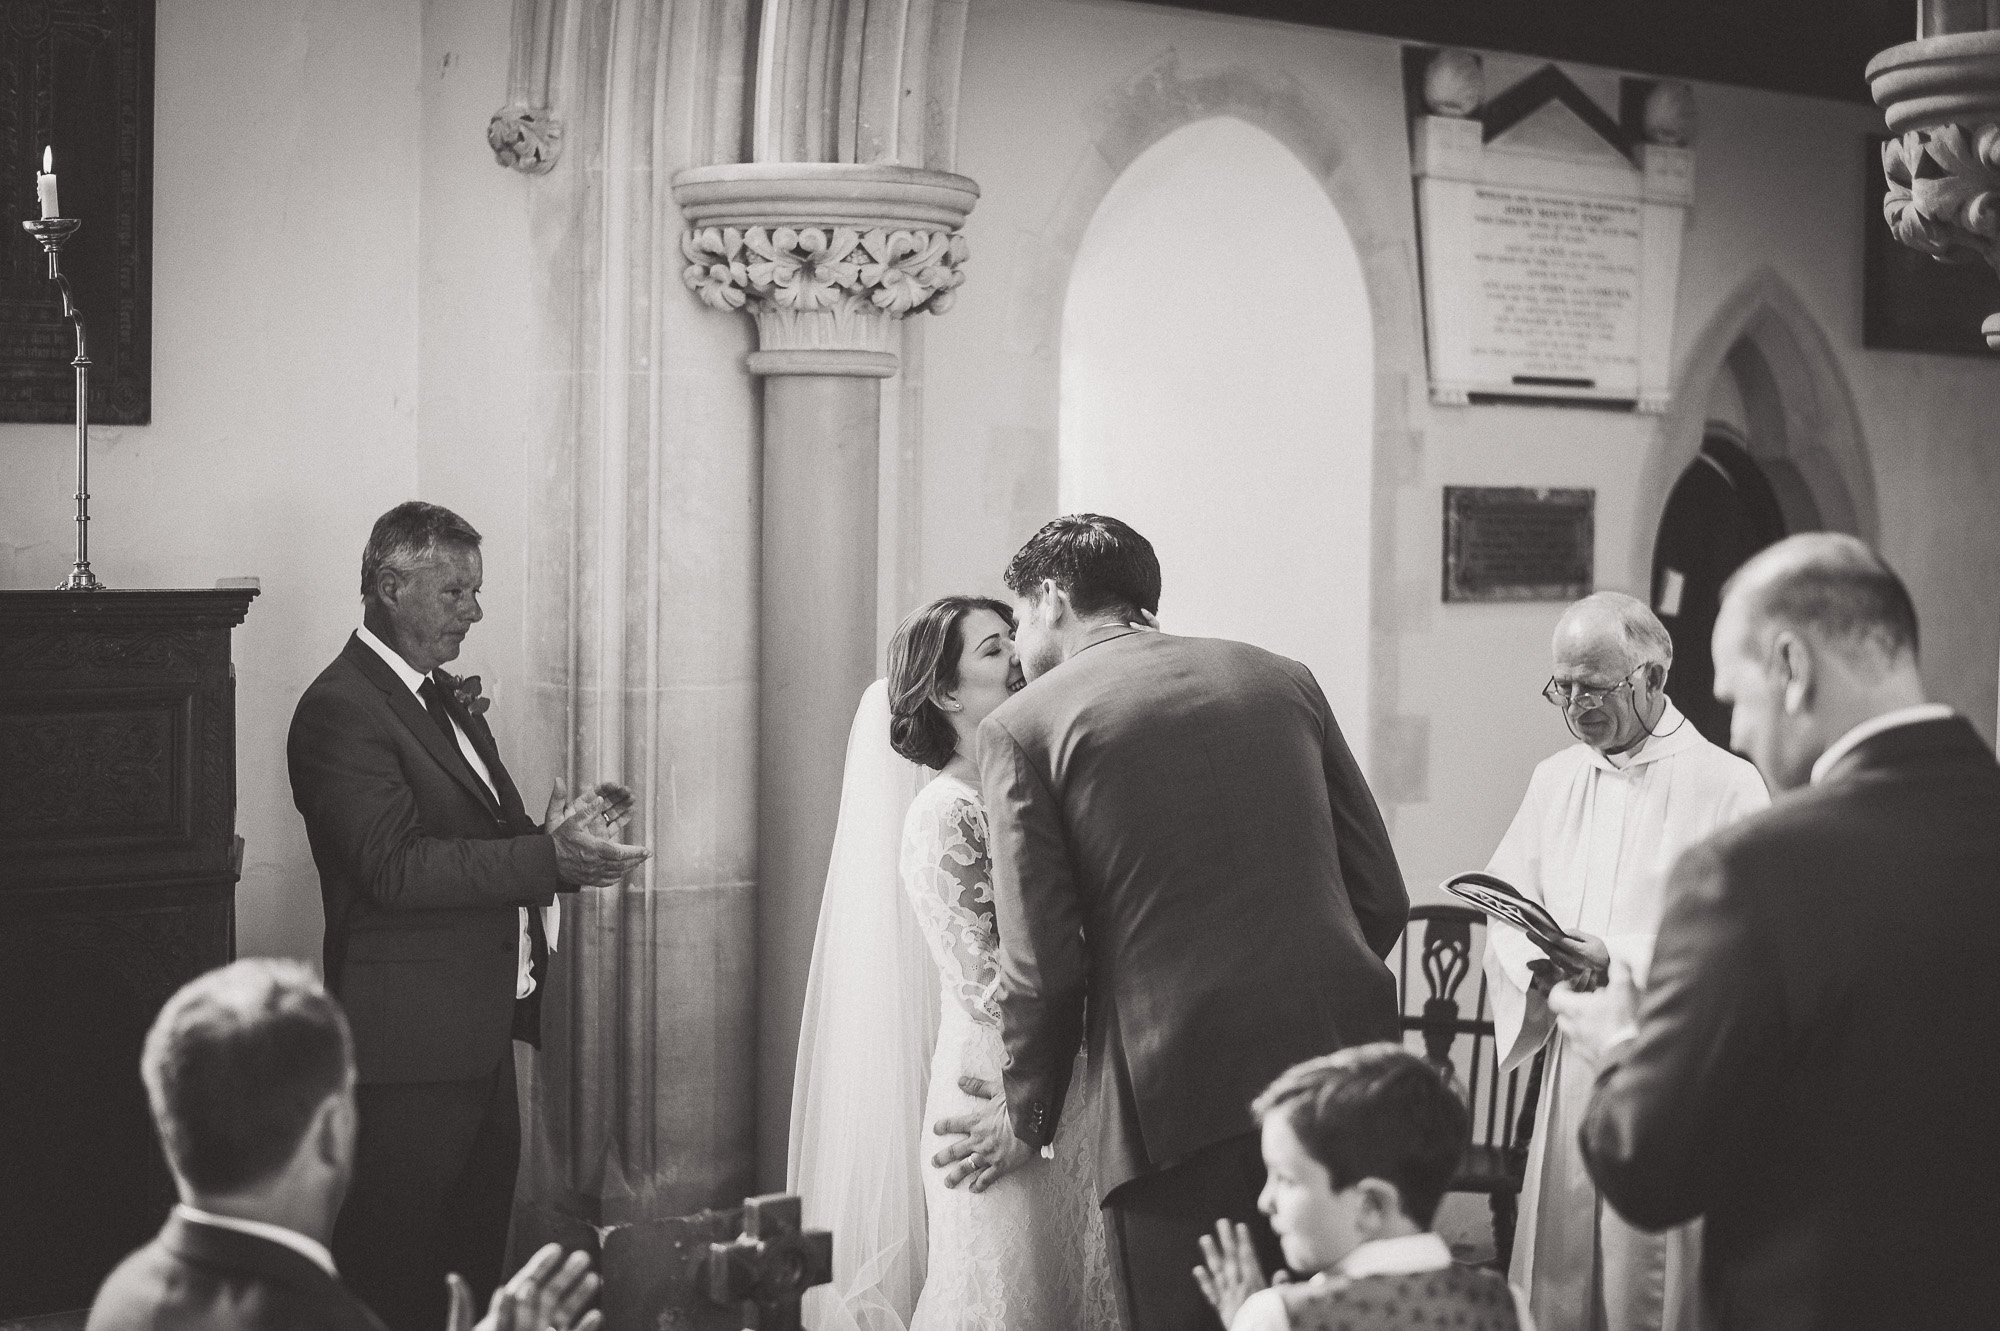 A wedding photo of a bride and groom kissing in a church.